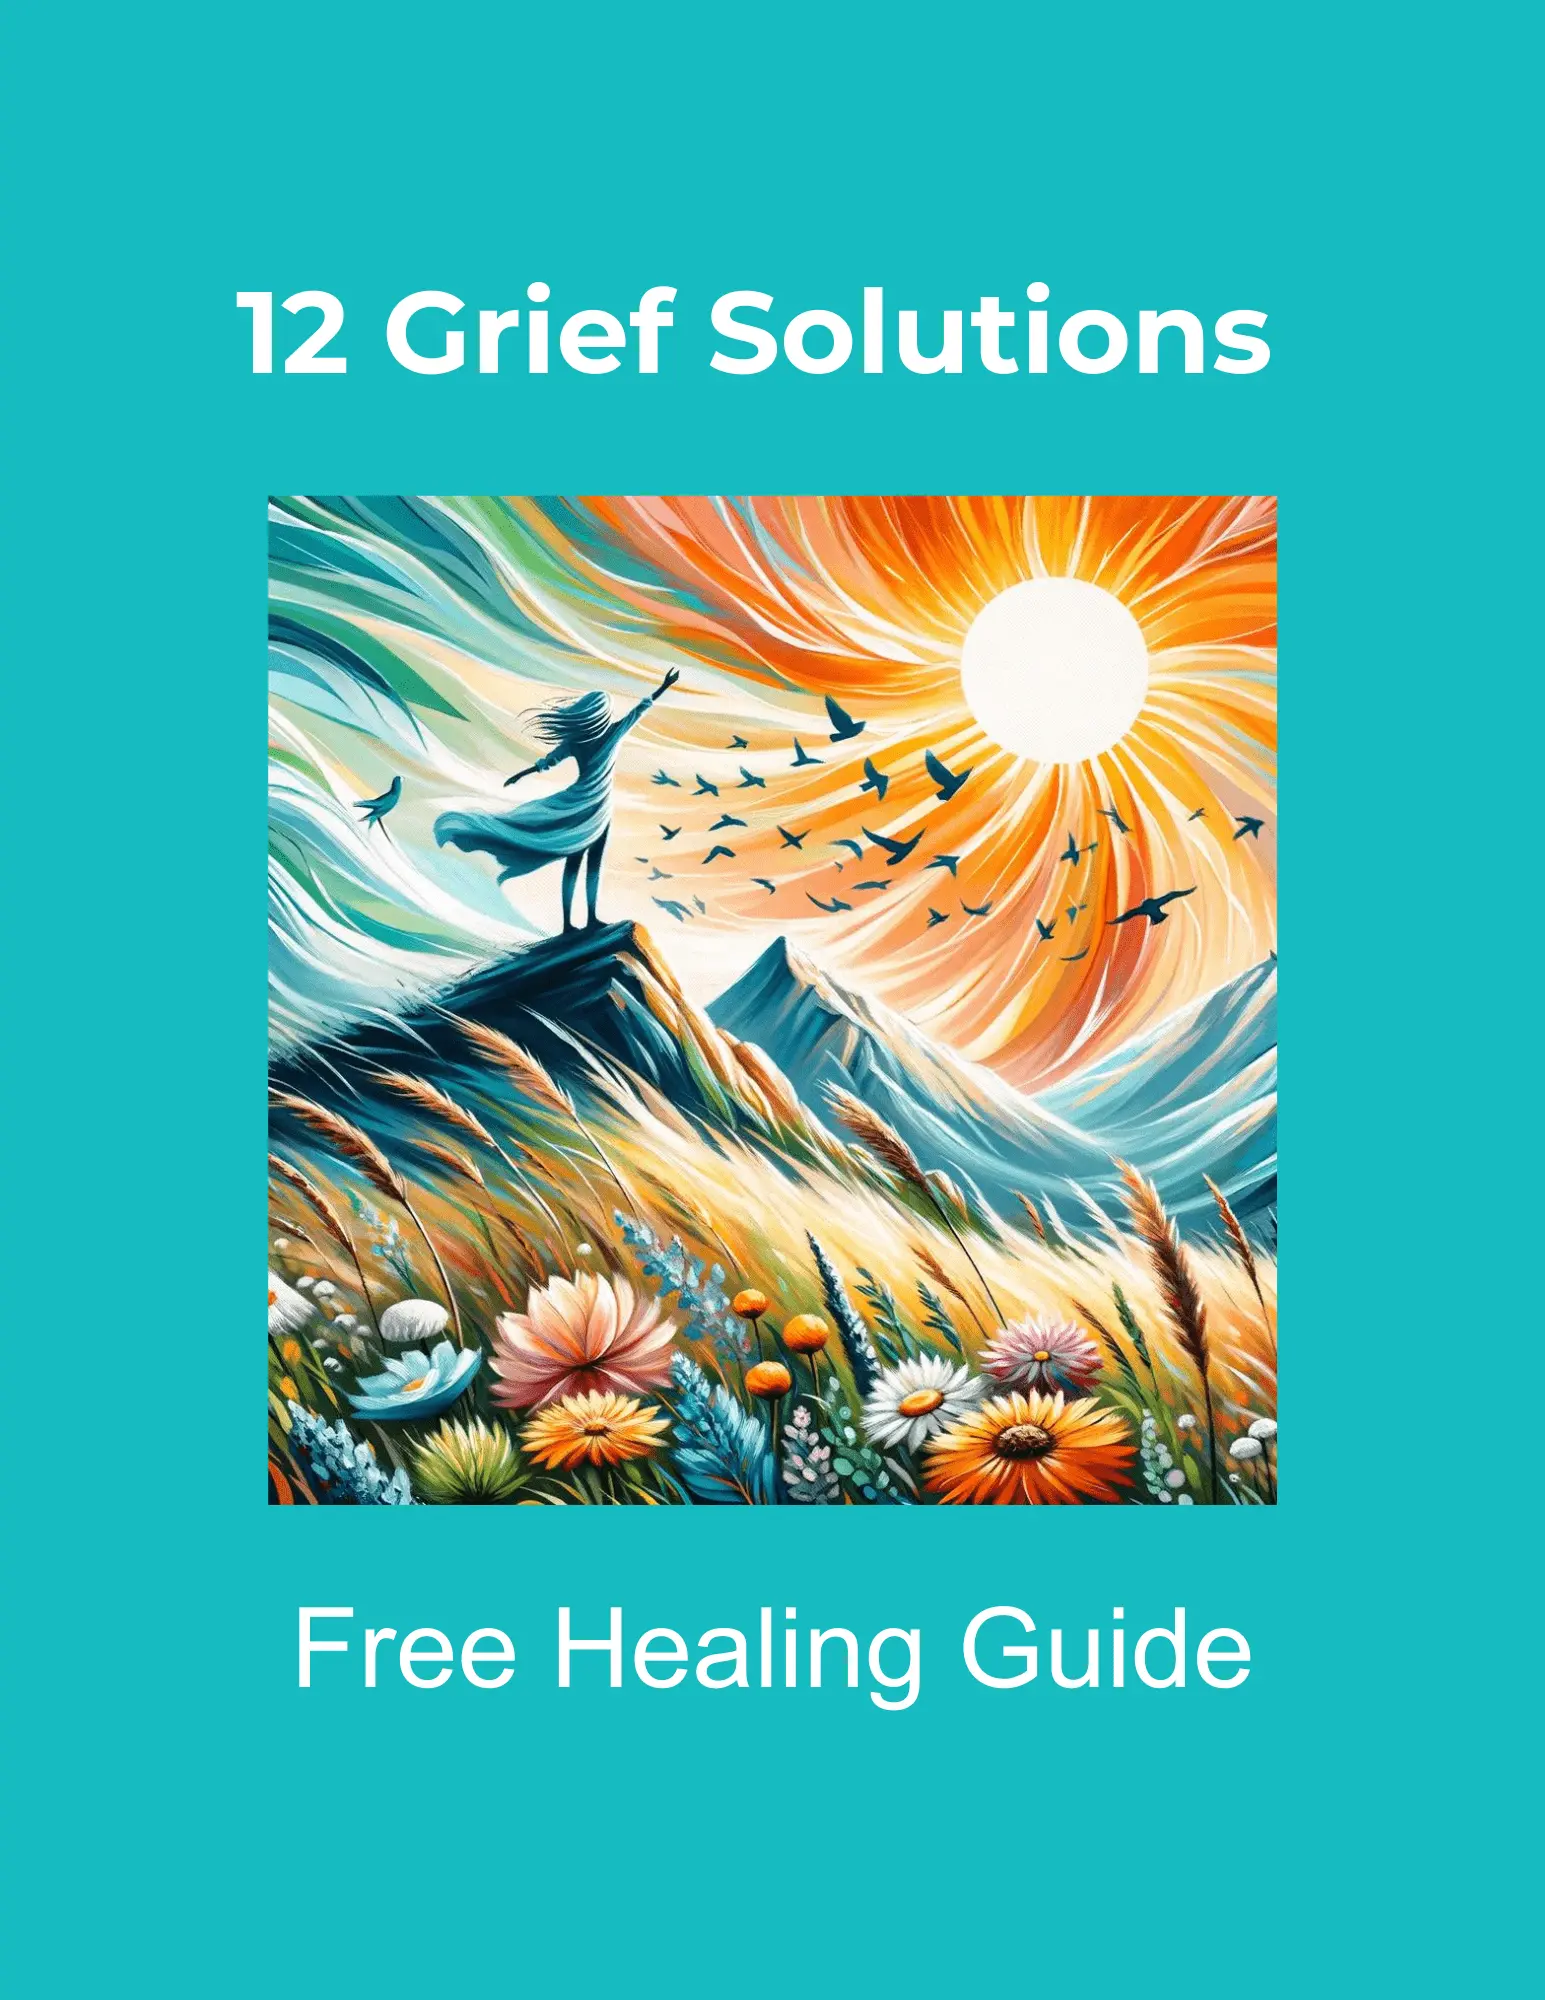 12 Grief Solutions: A Comprehensive Healing Guide"